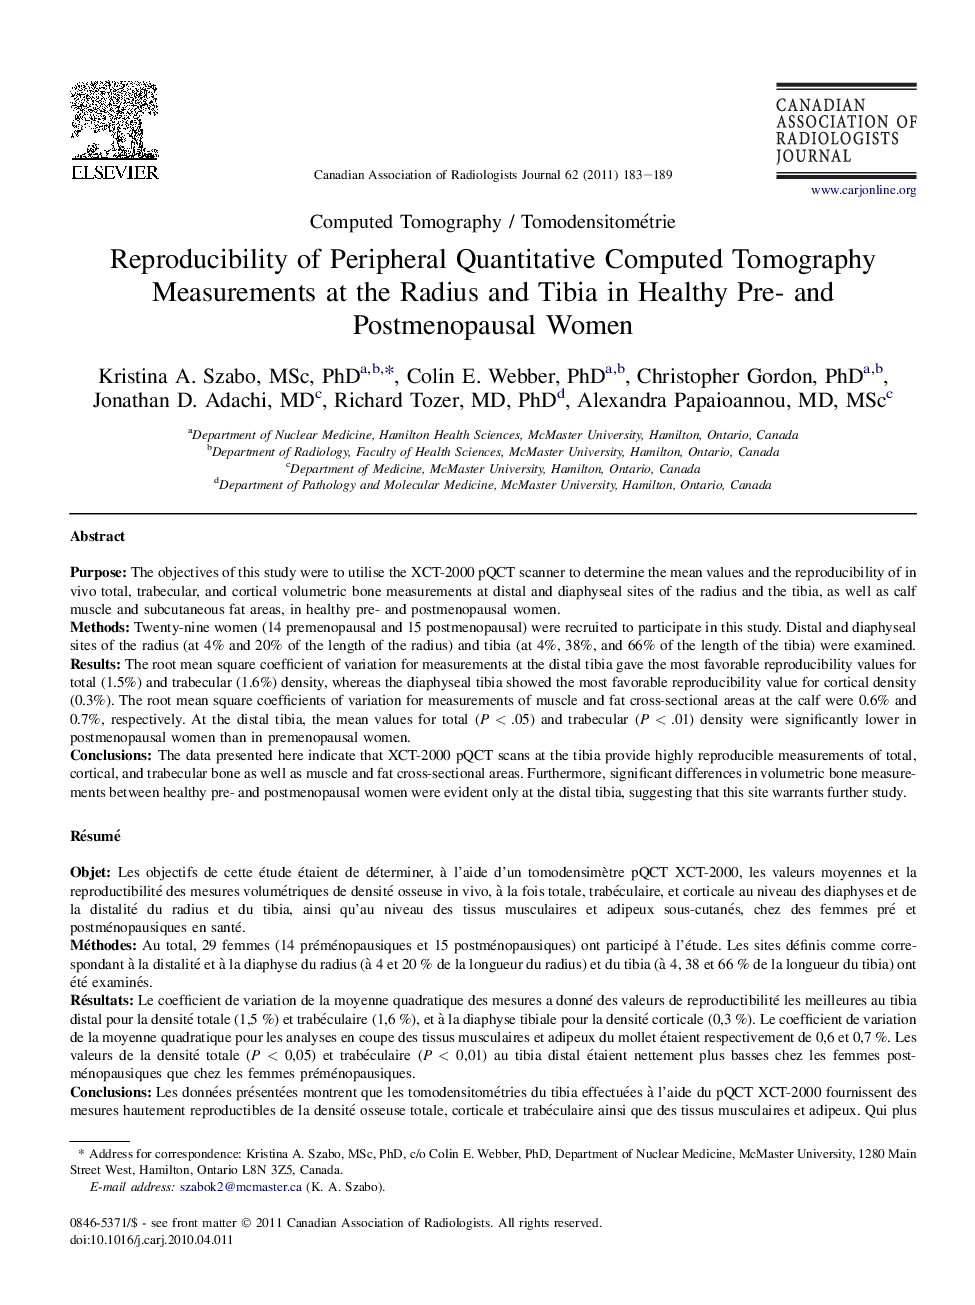 Reproducibility of Peripheral Quantitative Computed Tomography Measurements at the Radius and Tibia in Healthy Pre- and Postmenopausal Women